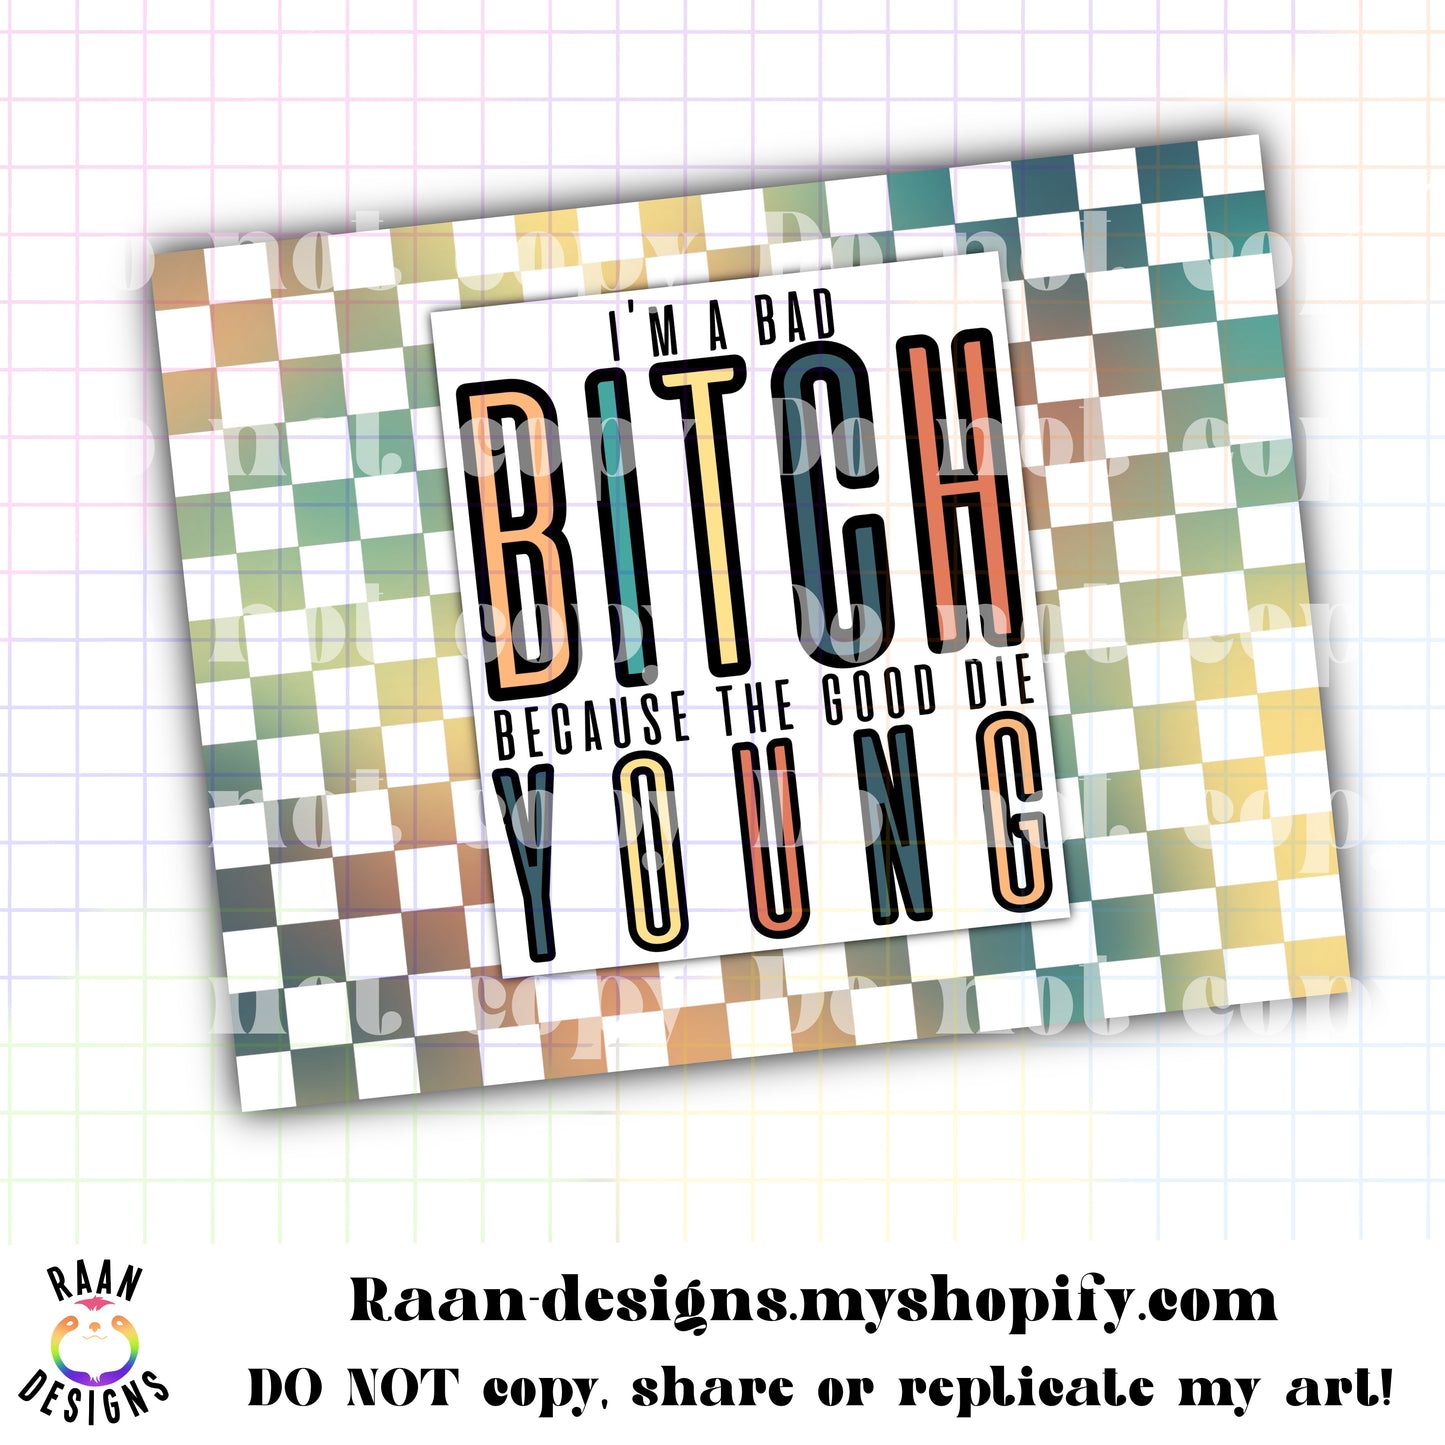 I'm A Bad Bitch Because the Good Die You with Rainbow Color Checker Pattern Background